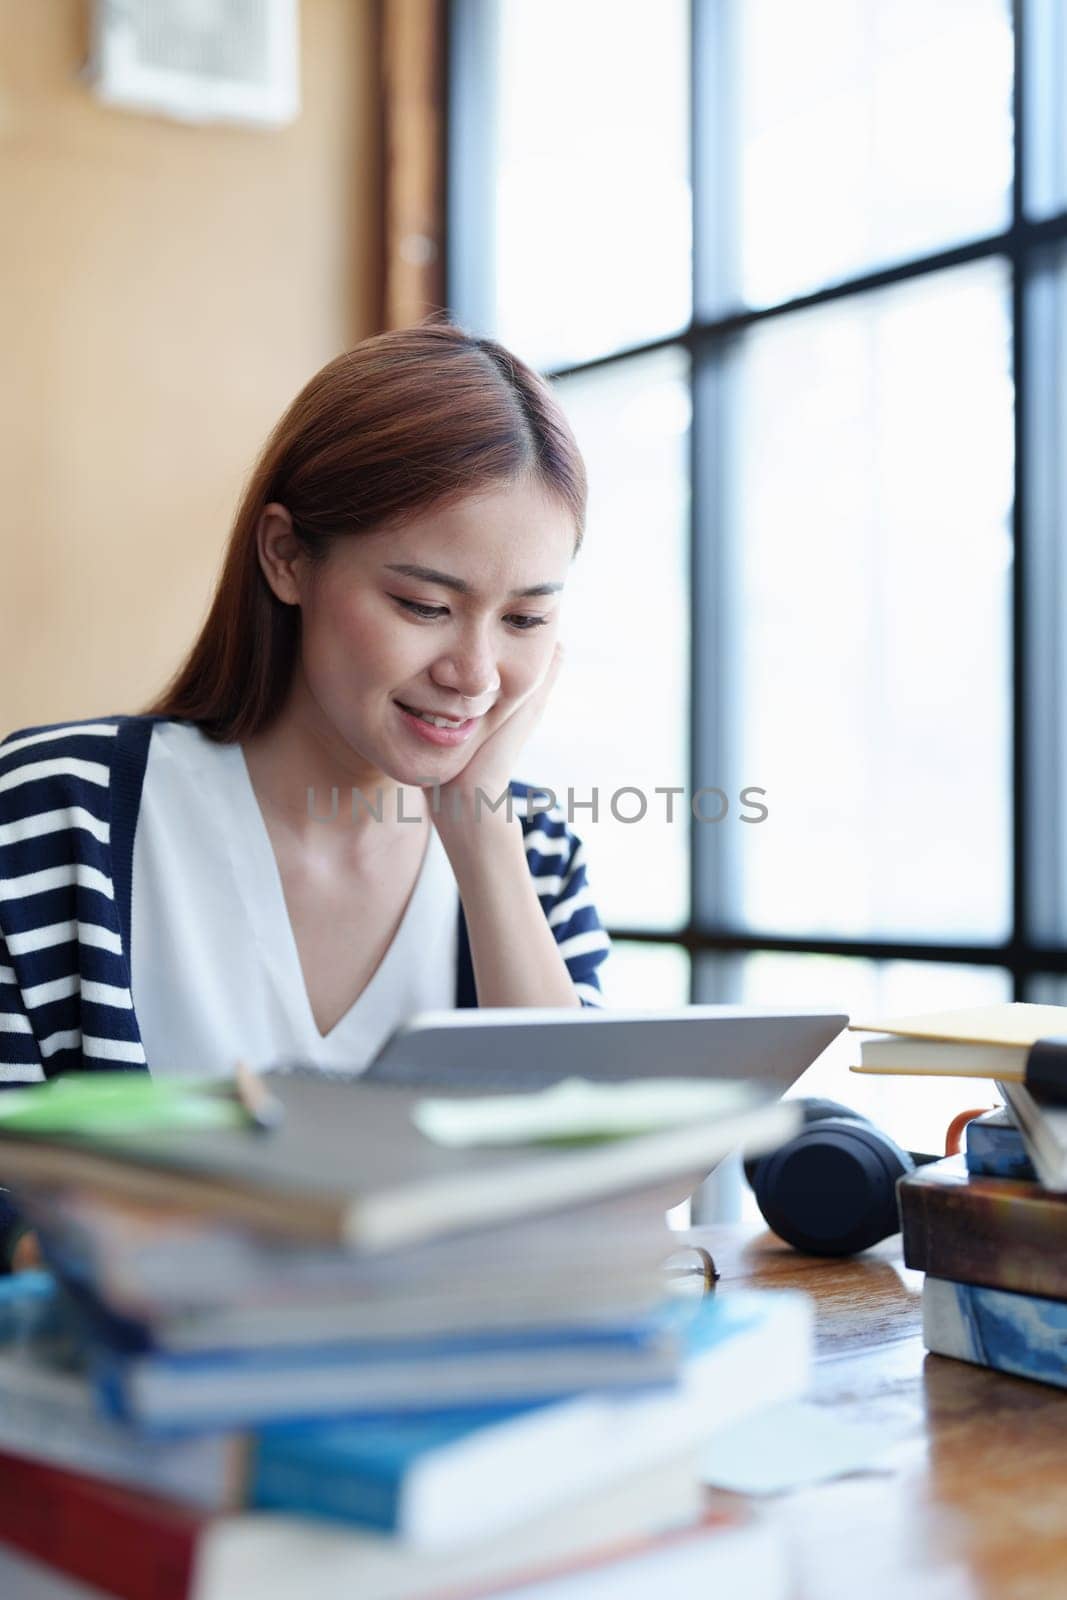 A portrait of a young Asian woman with a smiling face using a tablet computer during an online video conferencing class in a library.